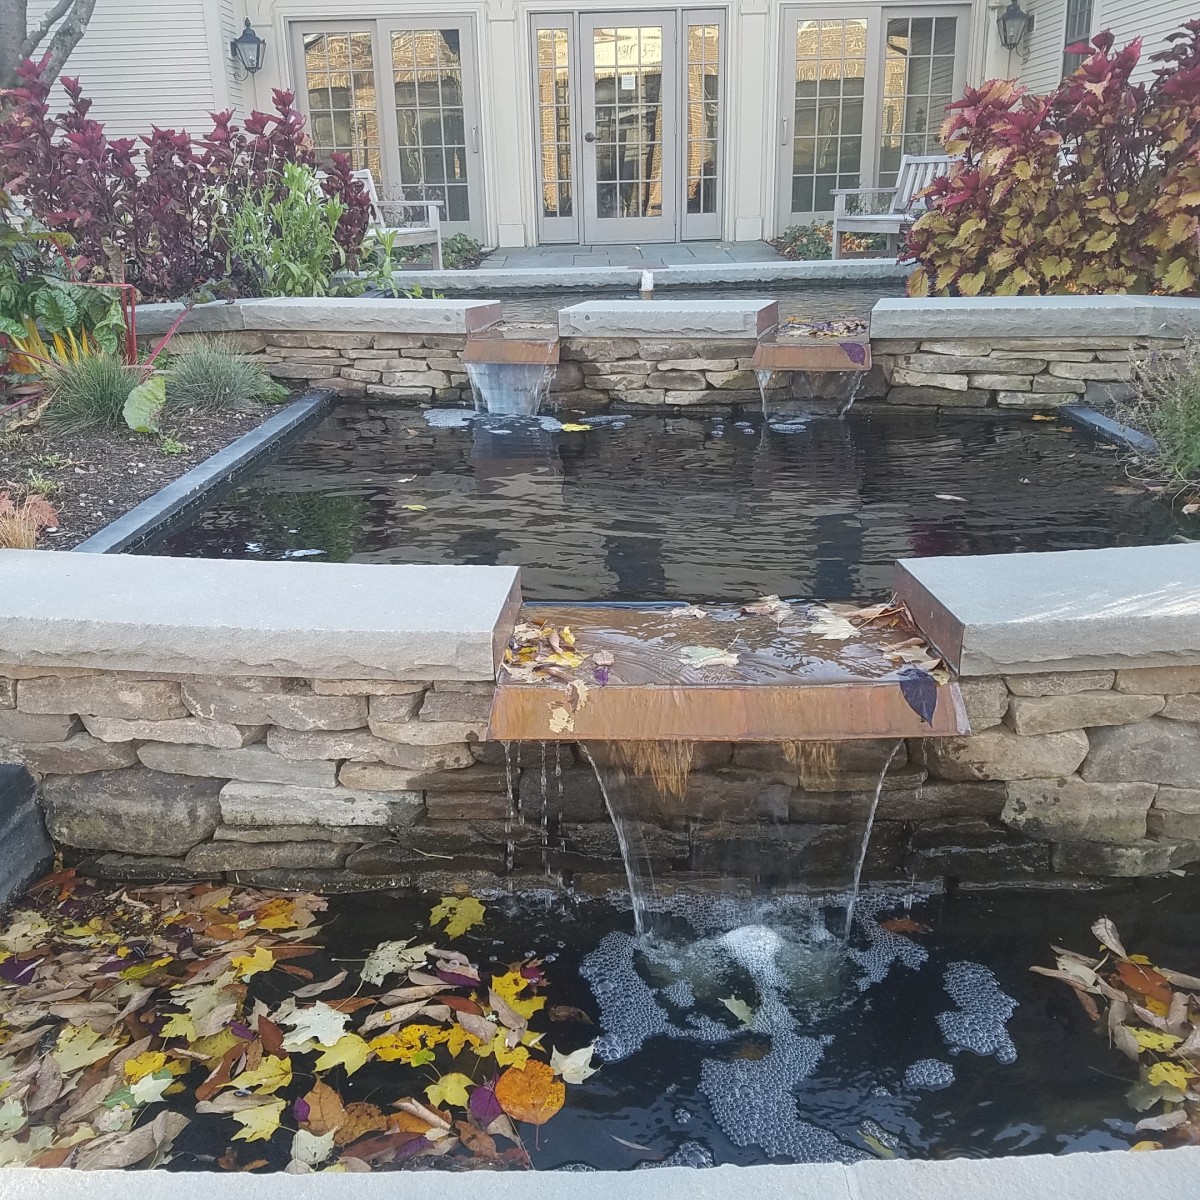 A water fountain at our local botanical garden.